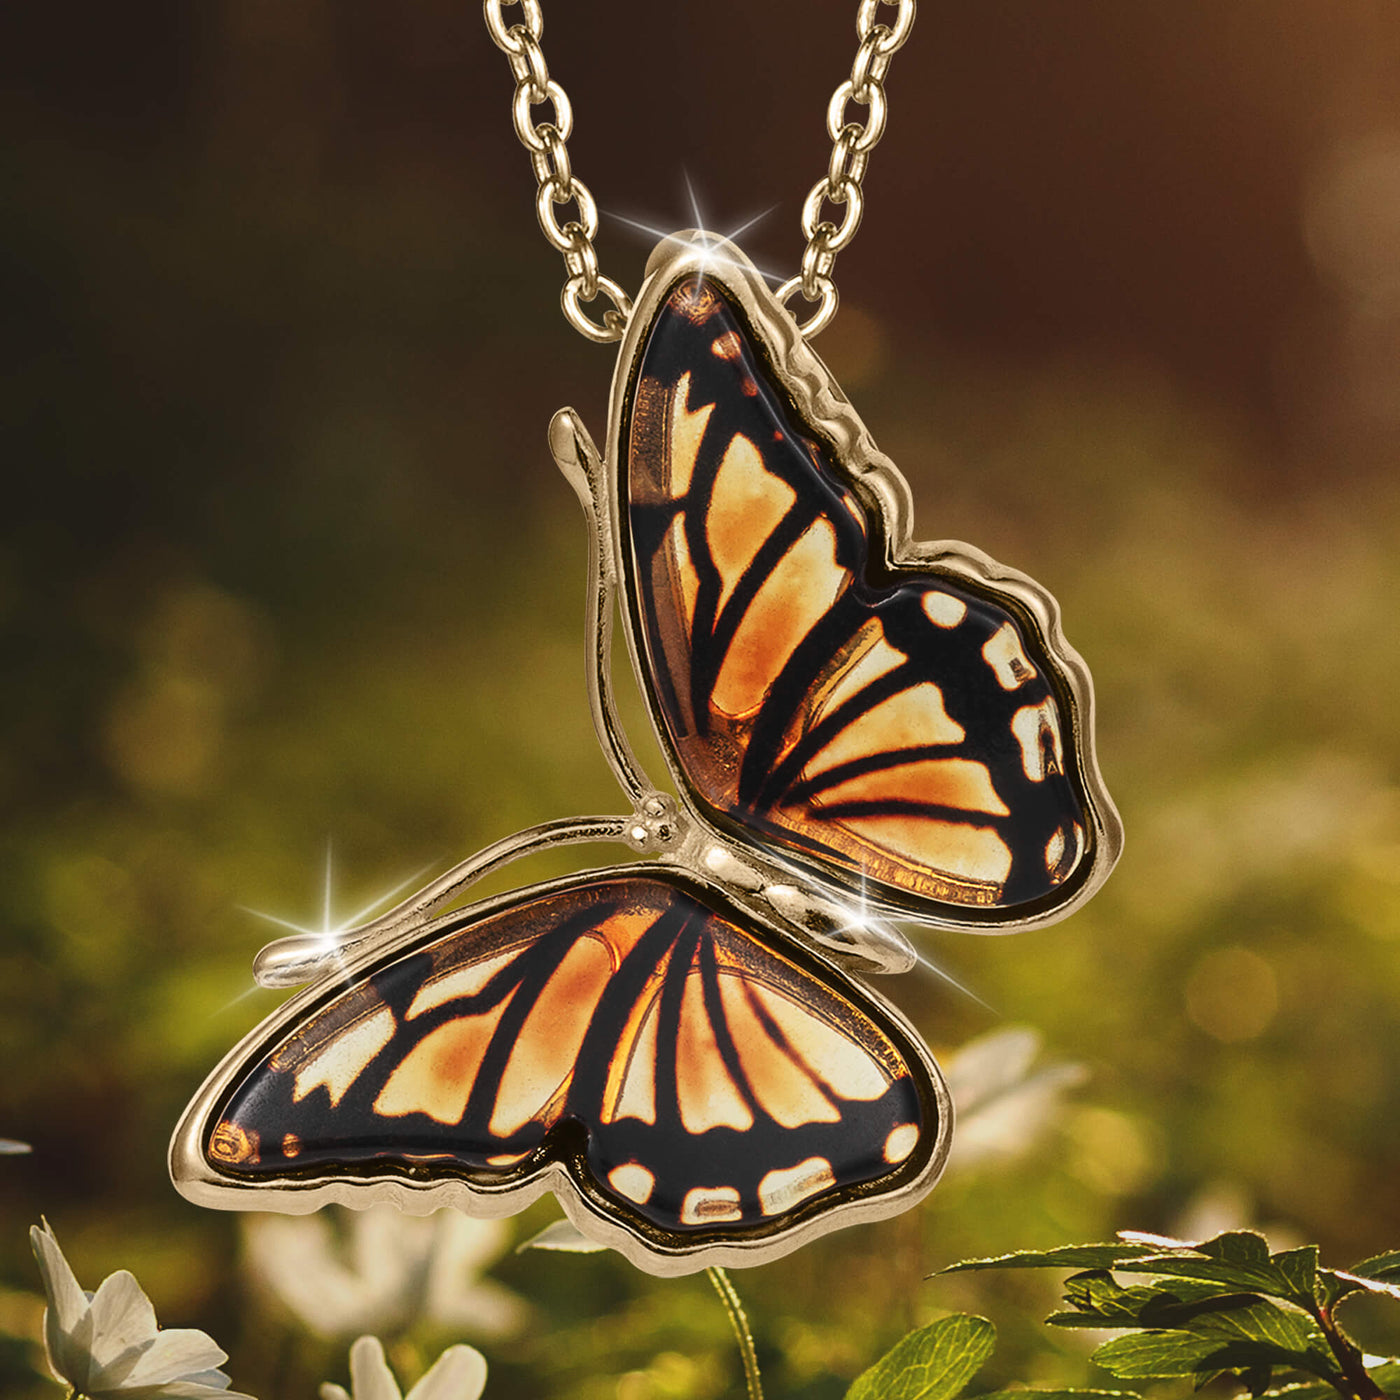 Daniel Steiger Baltic Amber Butterfly Collection